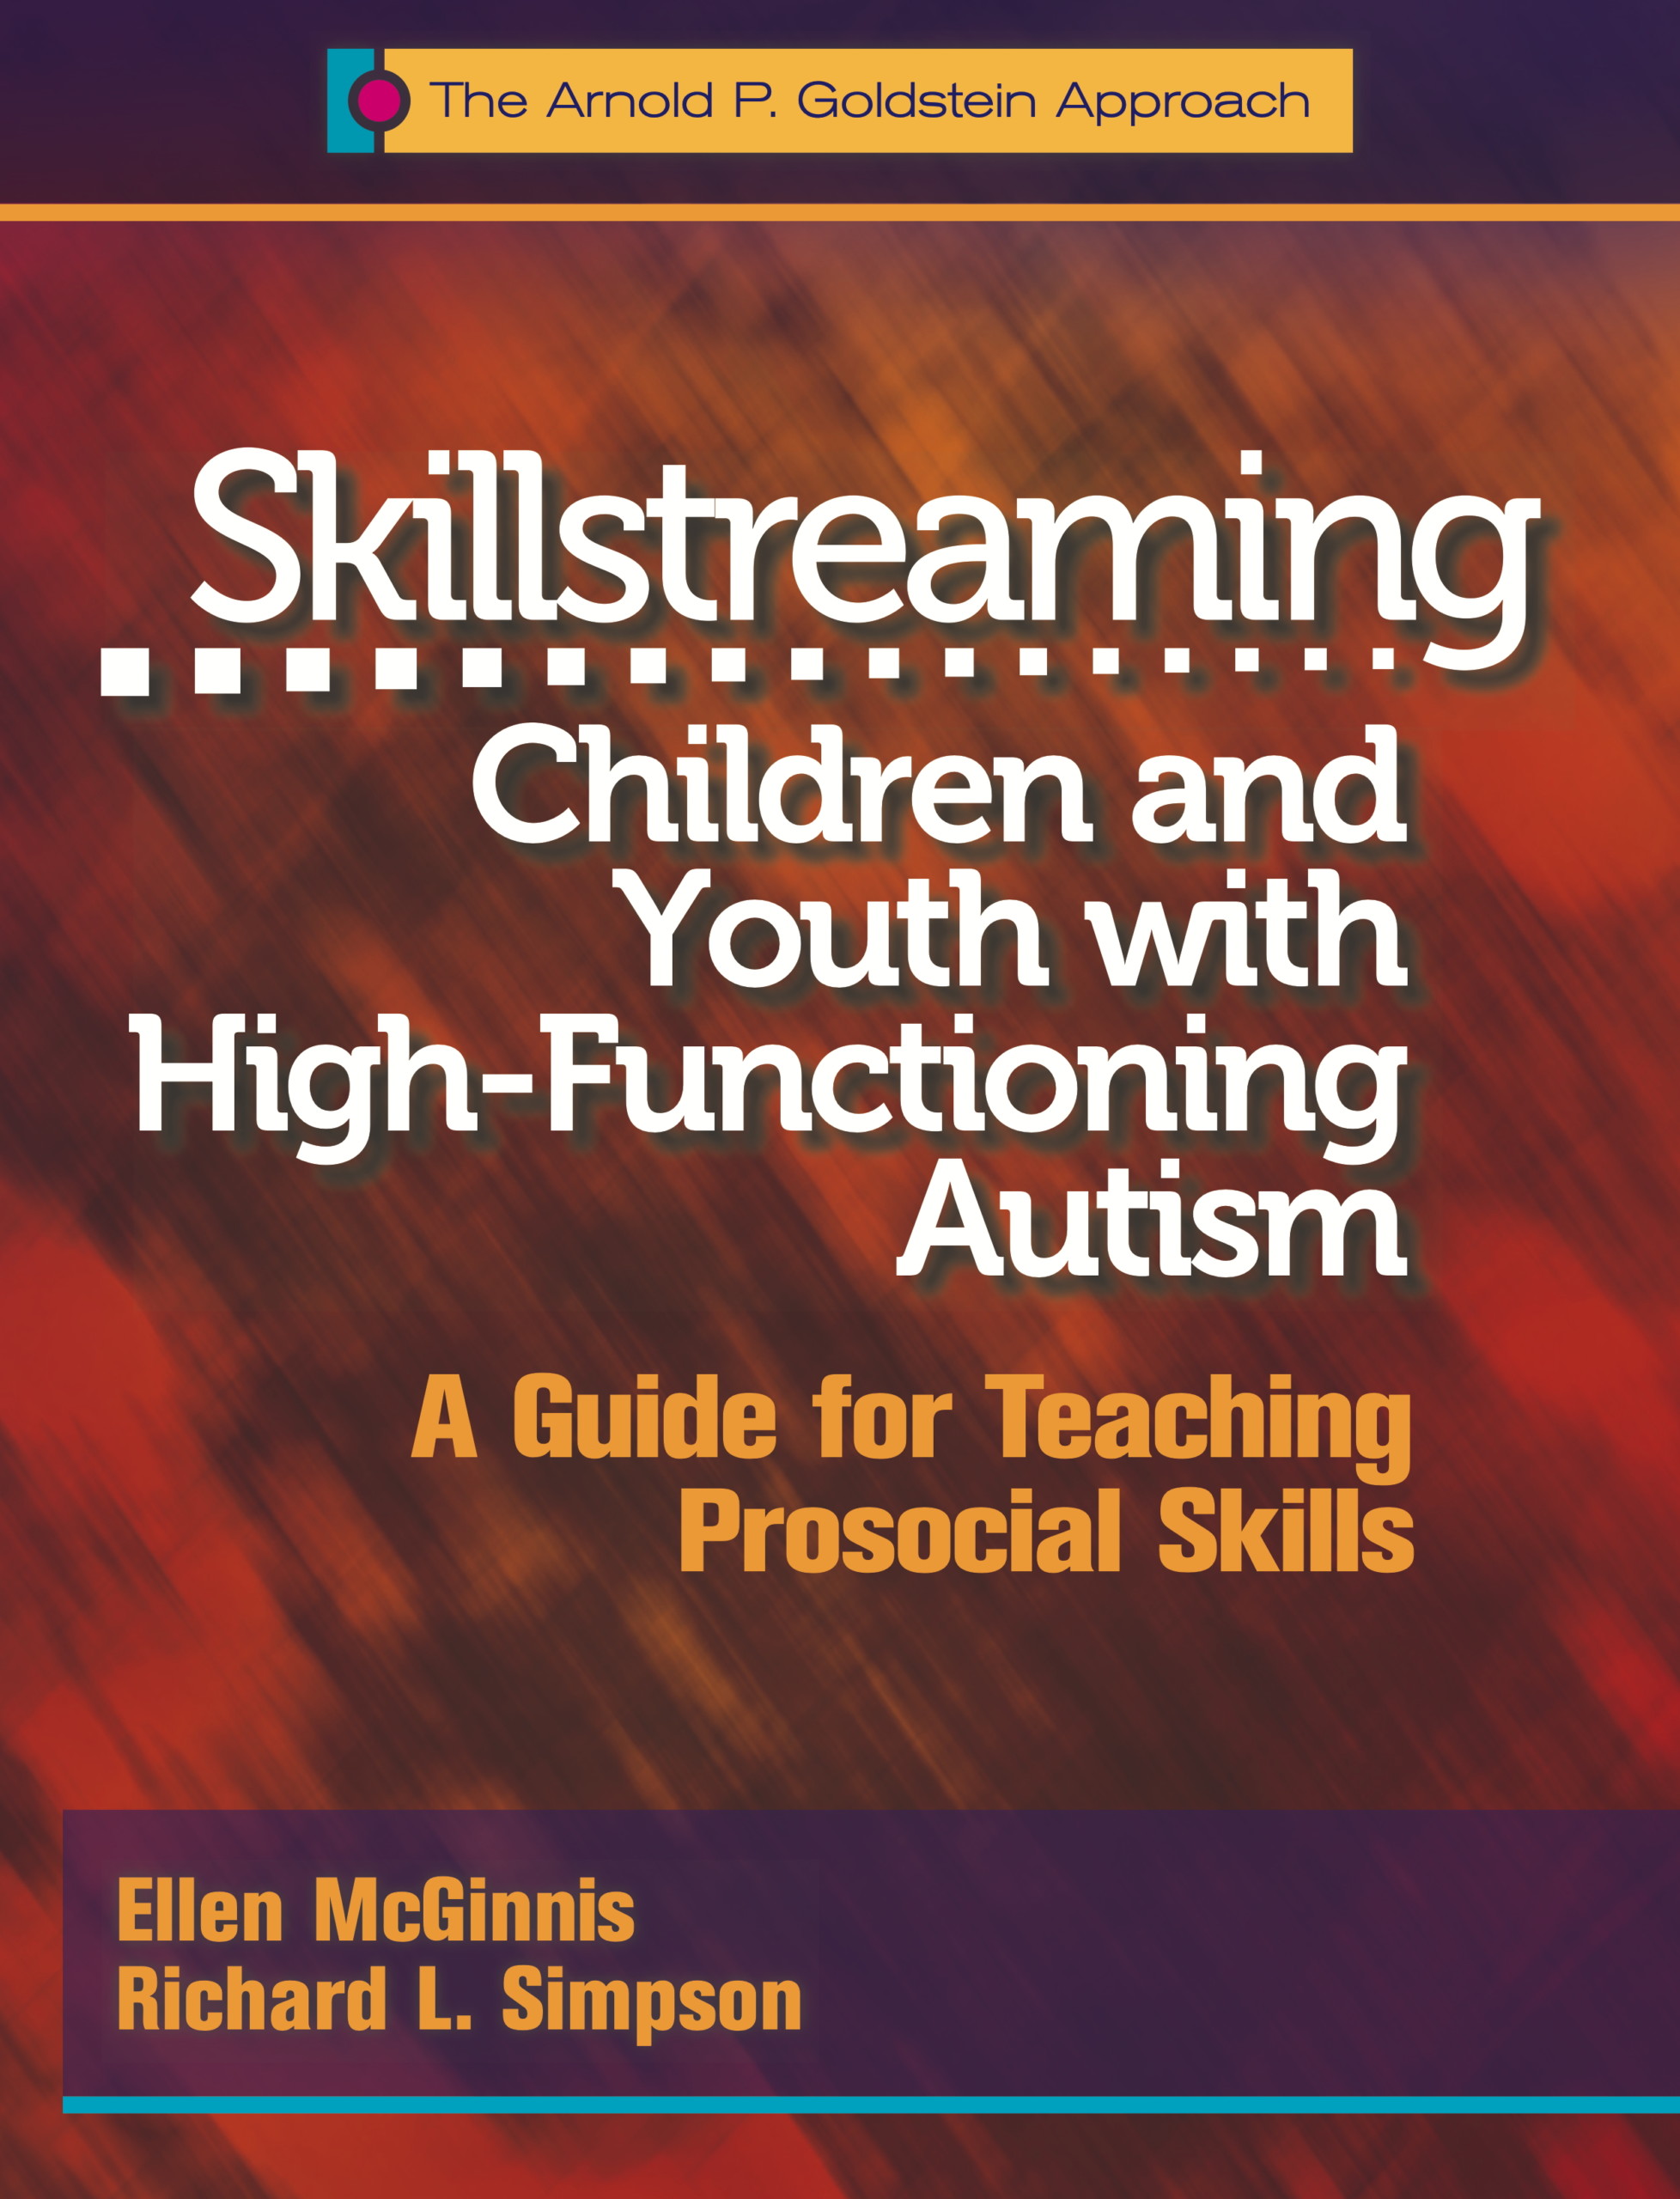 Skillstreaming Children and Youth with High-Functioning Autism (cover)